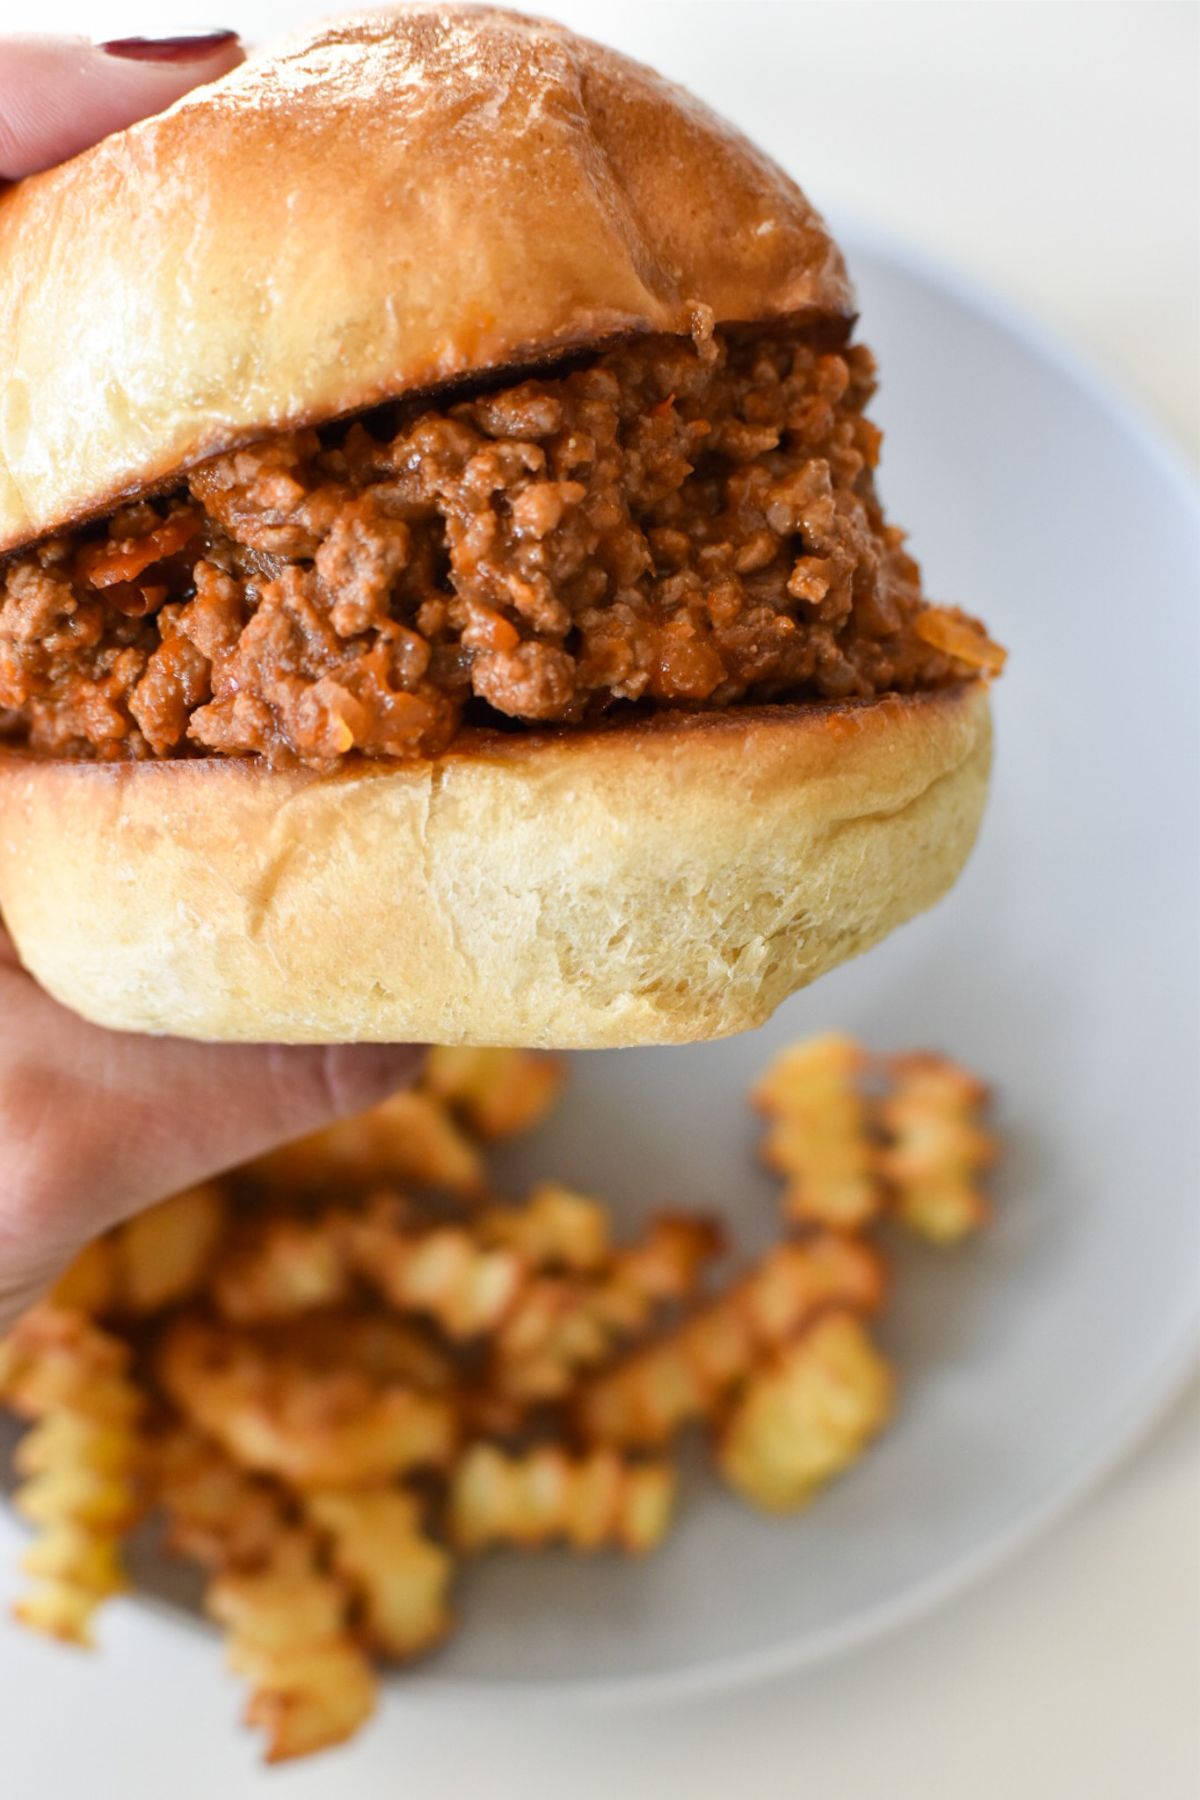 A hand holding a sloppy joe with a plate of french fries below it.